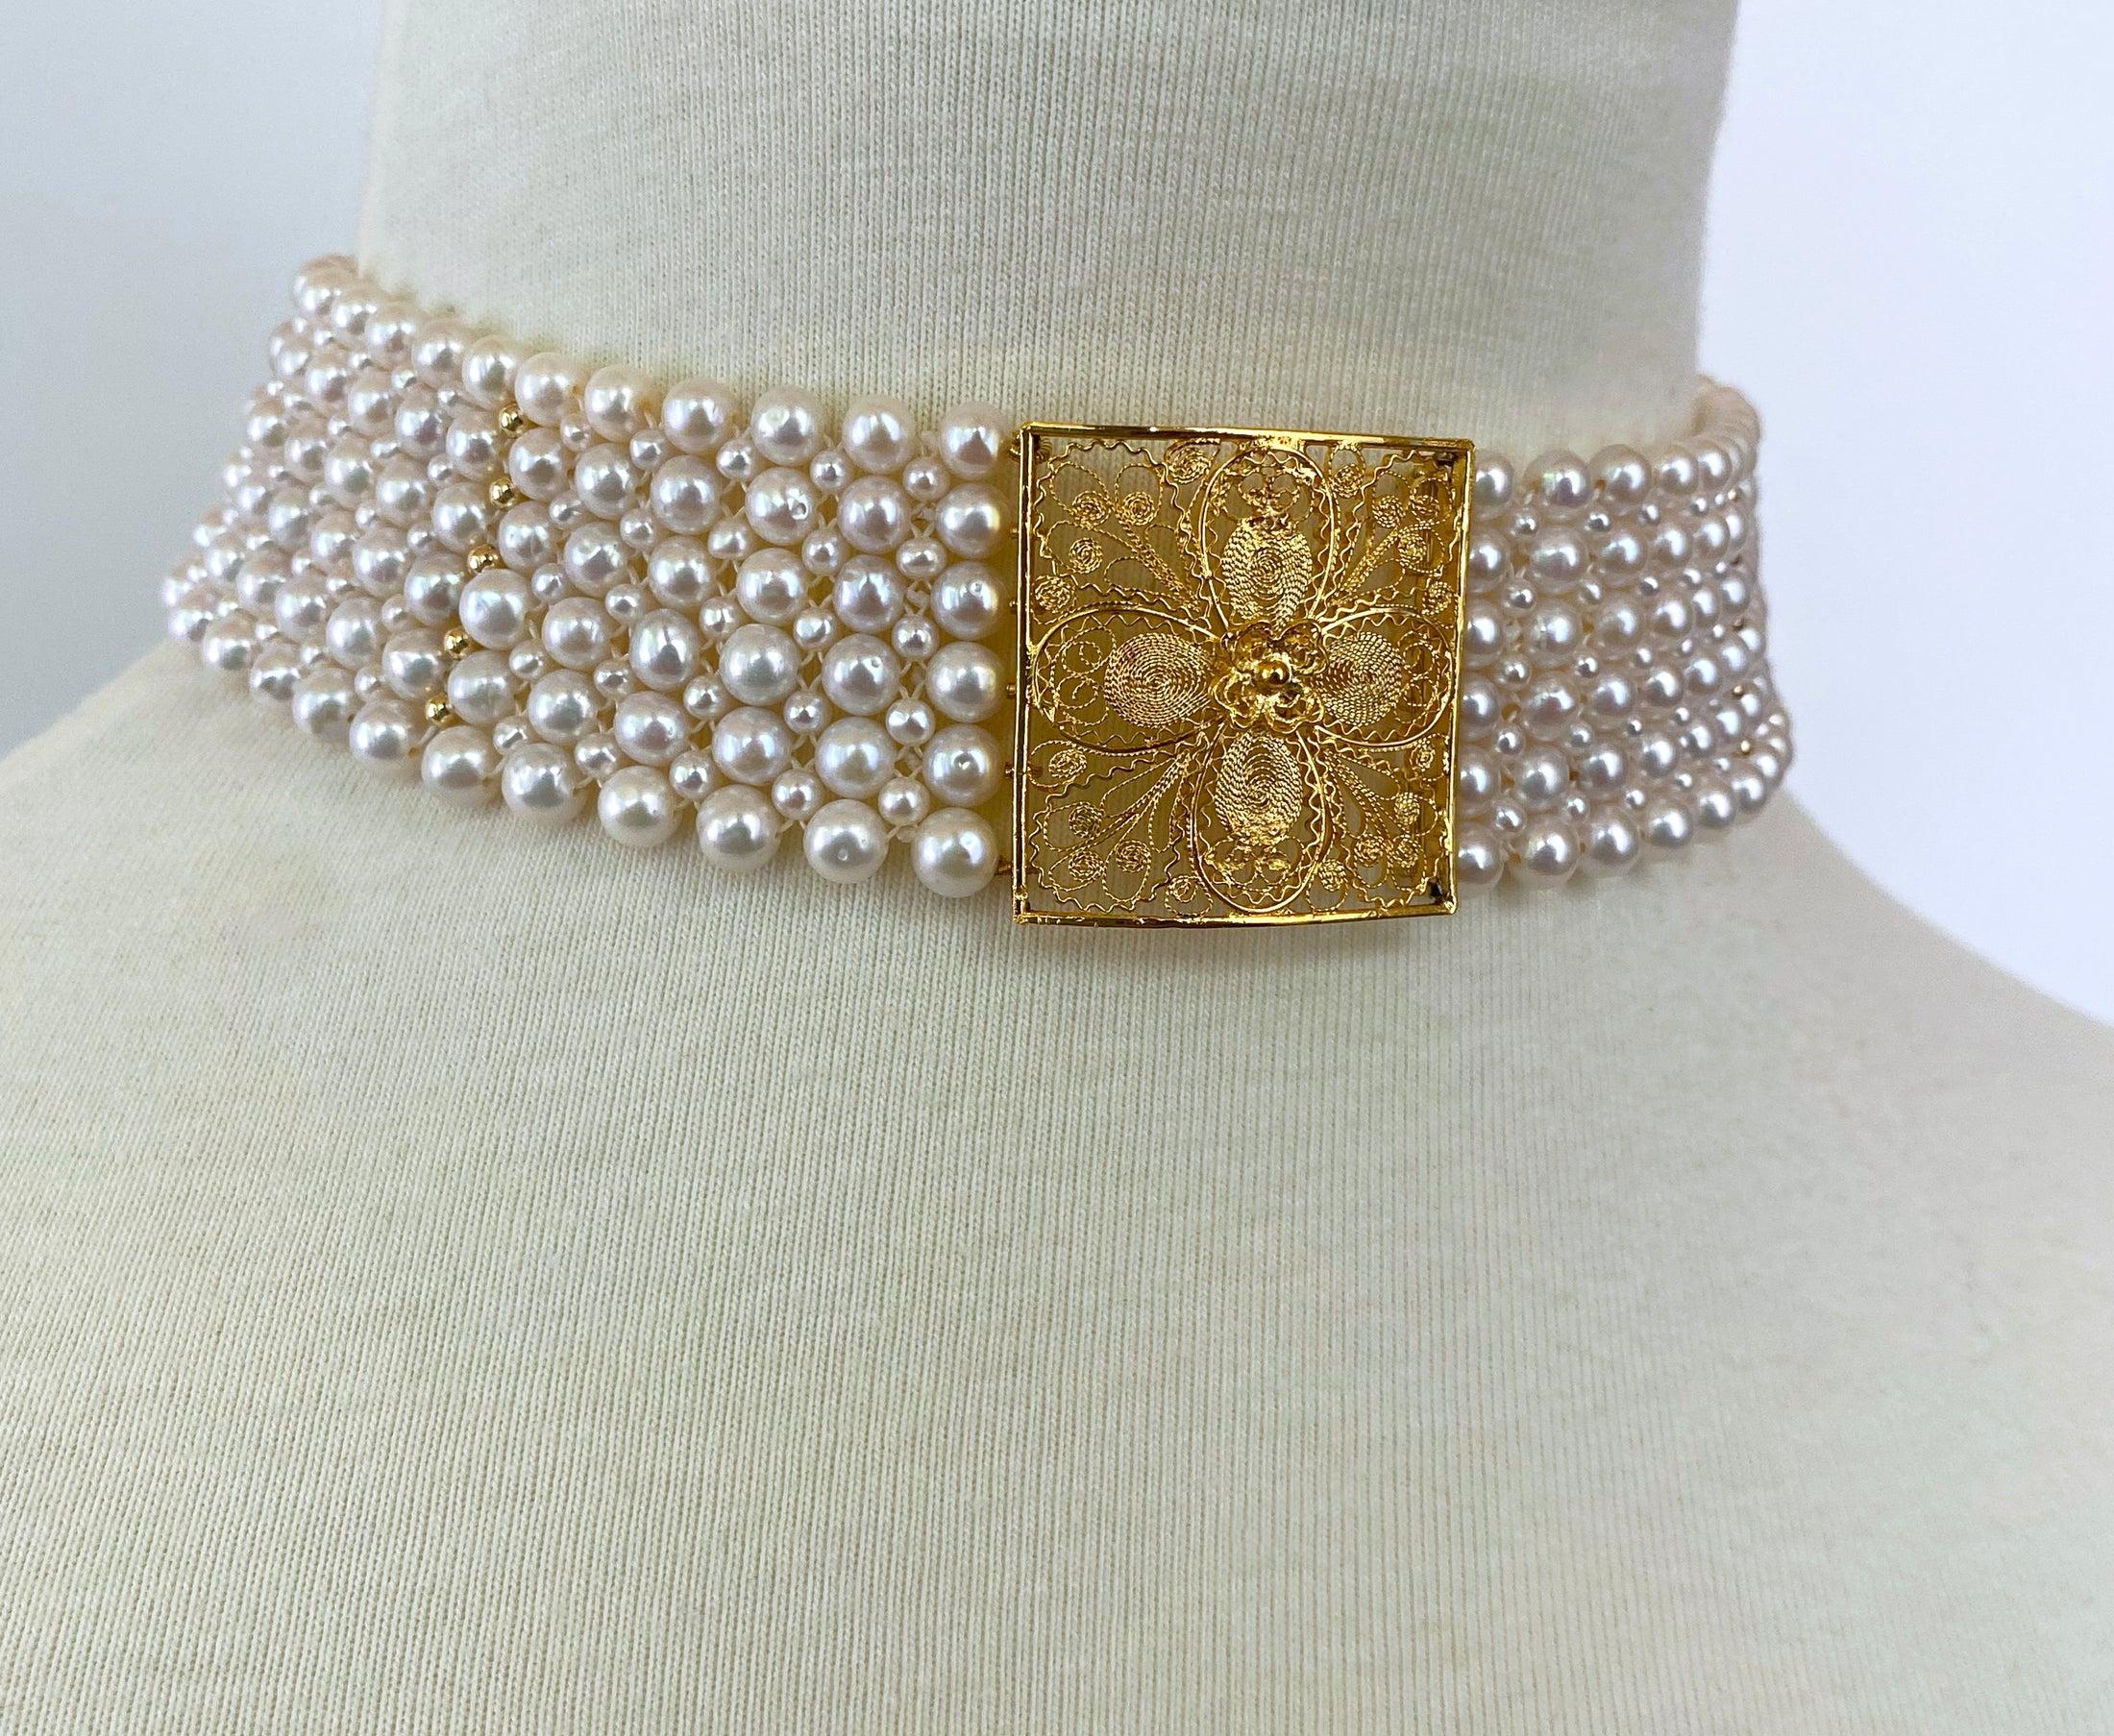 Marina J. Pearl Woven Bracelet with 18k Yellow Gold Floral Centerpiece  4